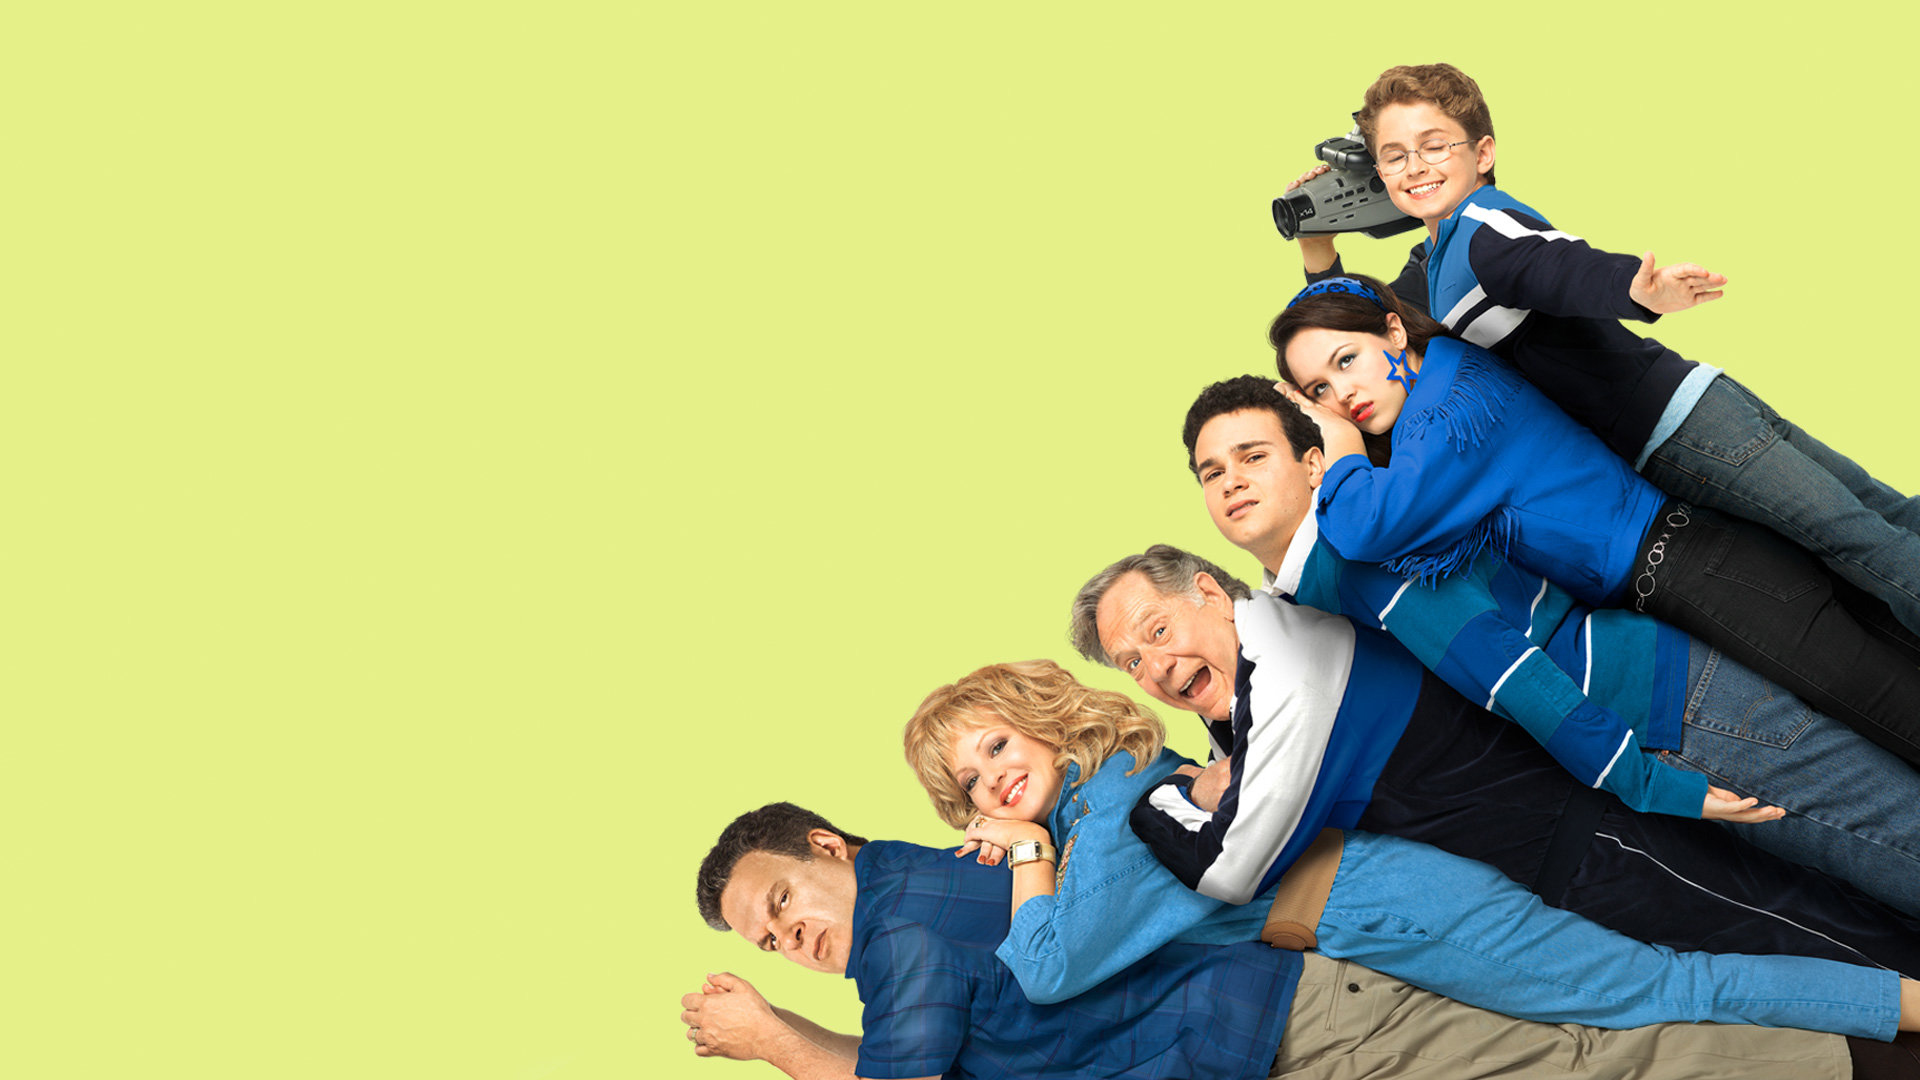 TV Show The Goldbergs HD Wallpaper | Background Image